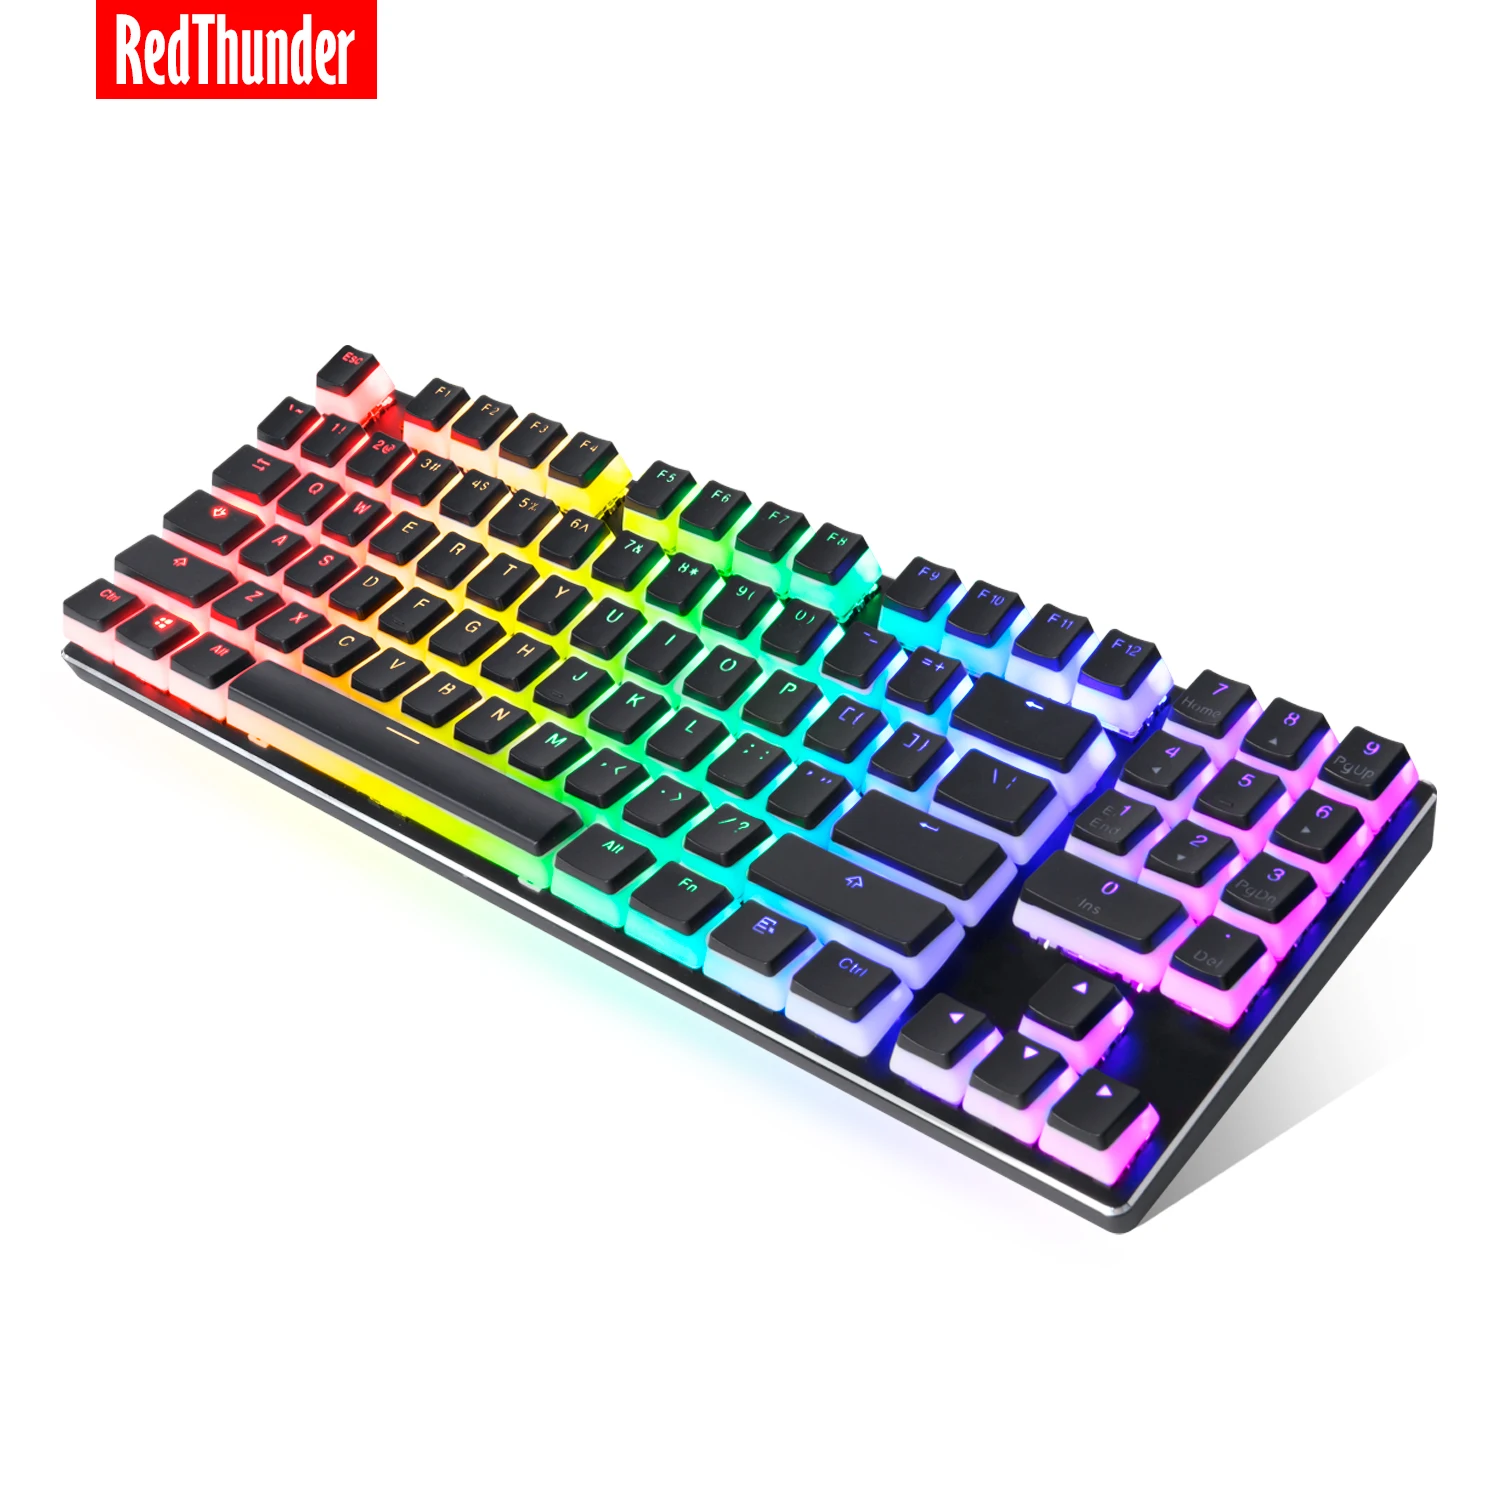 

RedThunder Mechanical Keyboard with PBT Pudding Keycaps,89-keys with numeric keypad,RGB Backlight with Blue Switches for PC